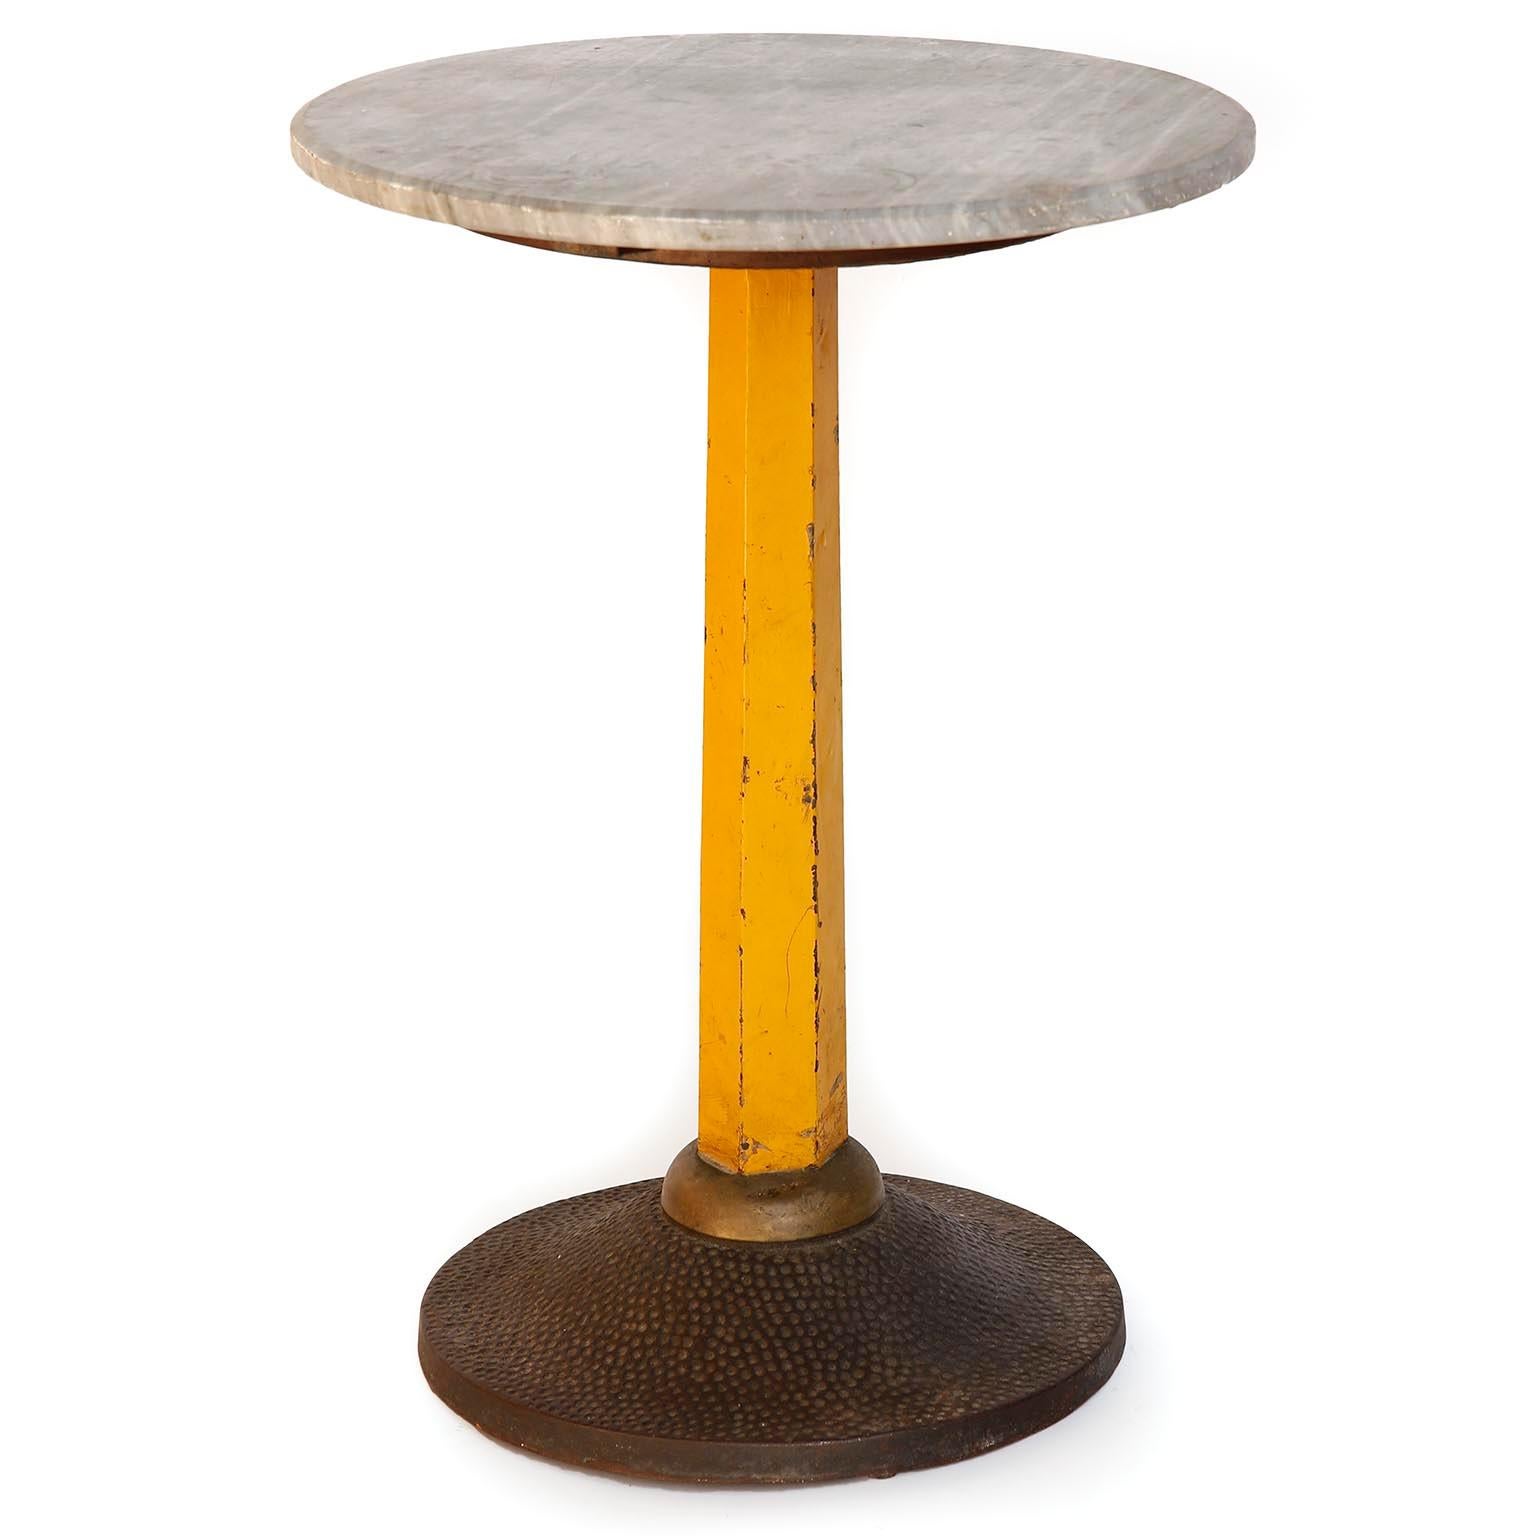 A pedestal table by Carl Witzmann made of grey marble, a yellow metal stand, and a cast iron base.
Carl Witzmann designed the 'Café Esplanade Zauner' in Bad Ischl, Austria, which opened in 1927. This table was part of that interior.
The table is in